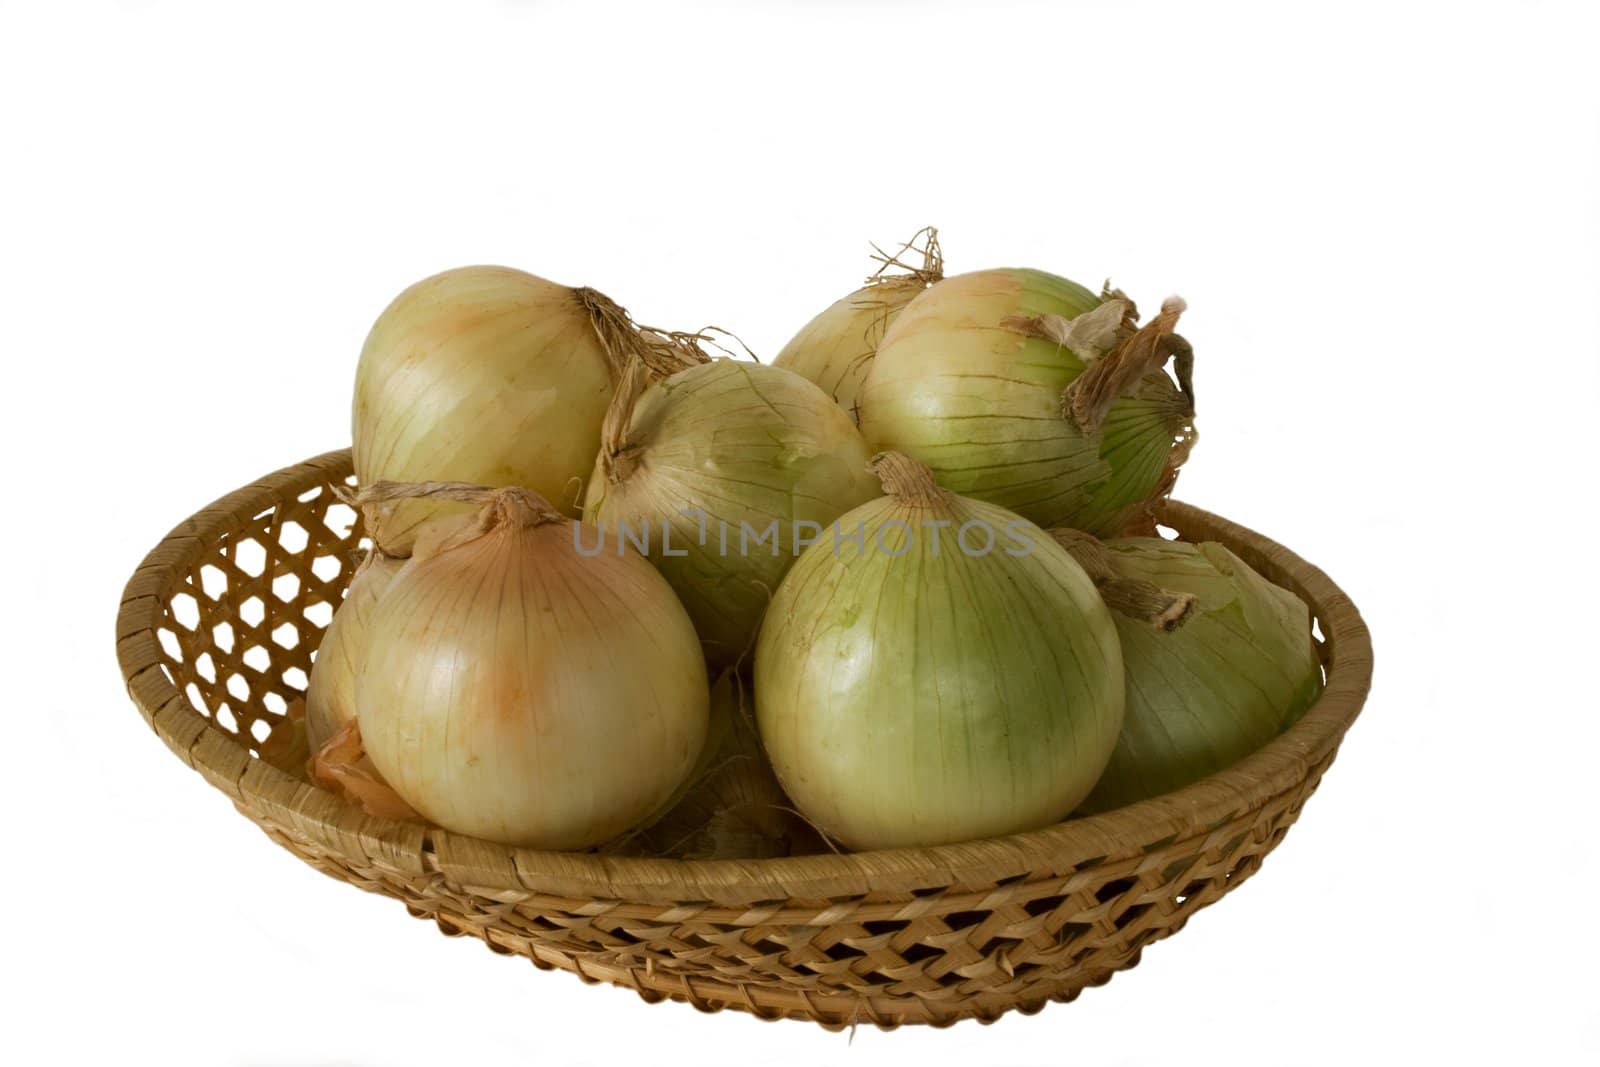 New onion in wicker wooden vase in isolated over white